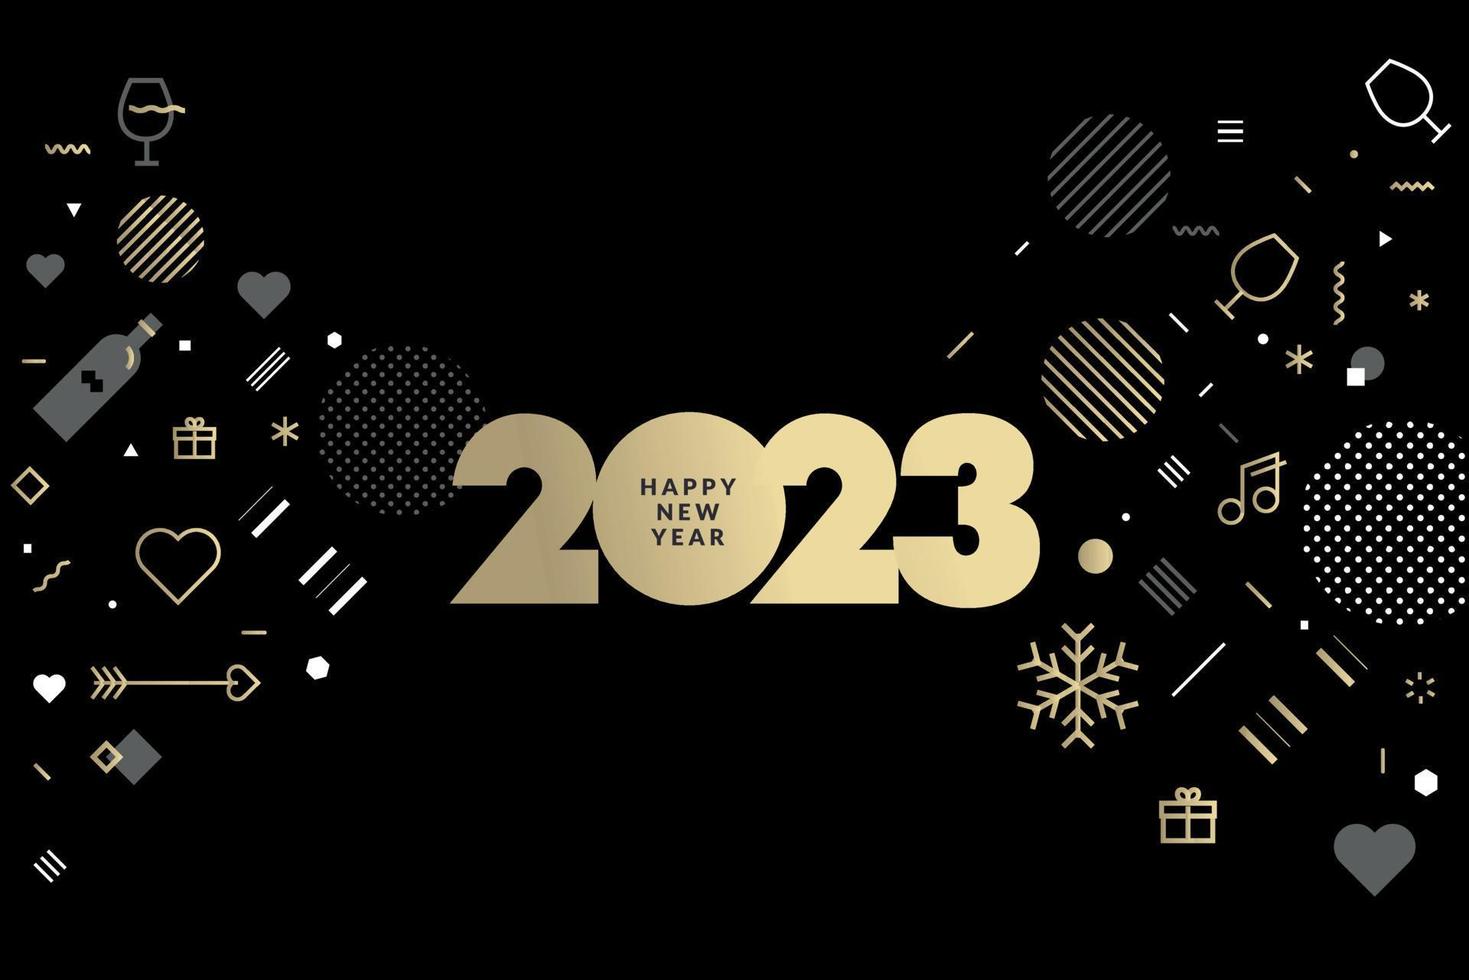 2023 New Year greeting card. Vector illustration concept for background, greeting card, party invitation card, website banner, social media banner, marketing material.